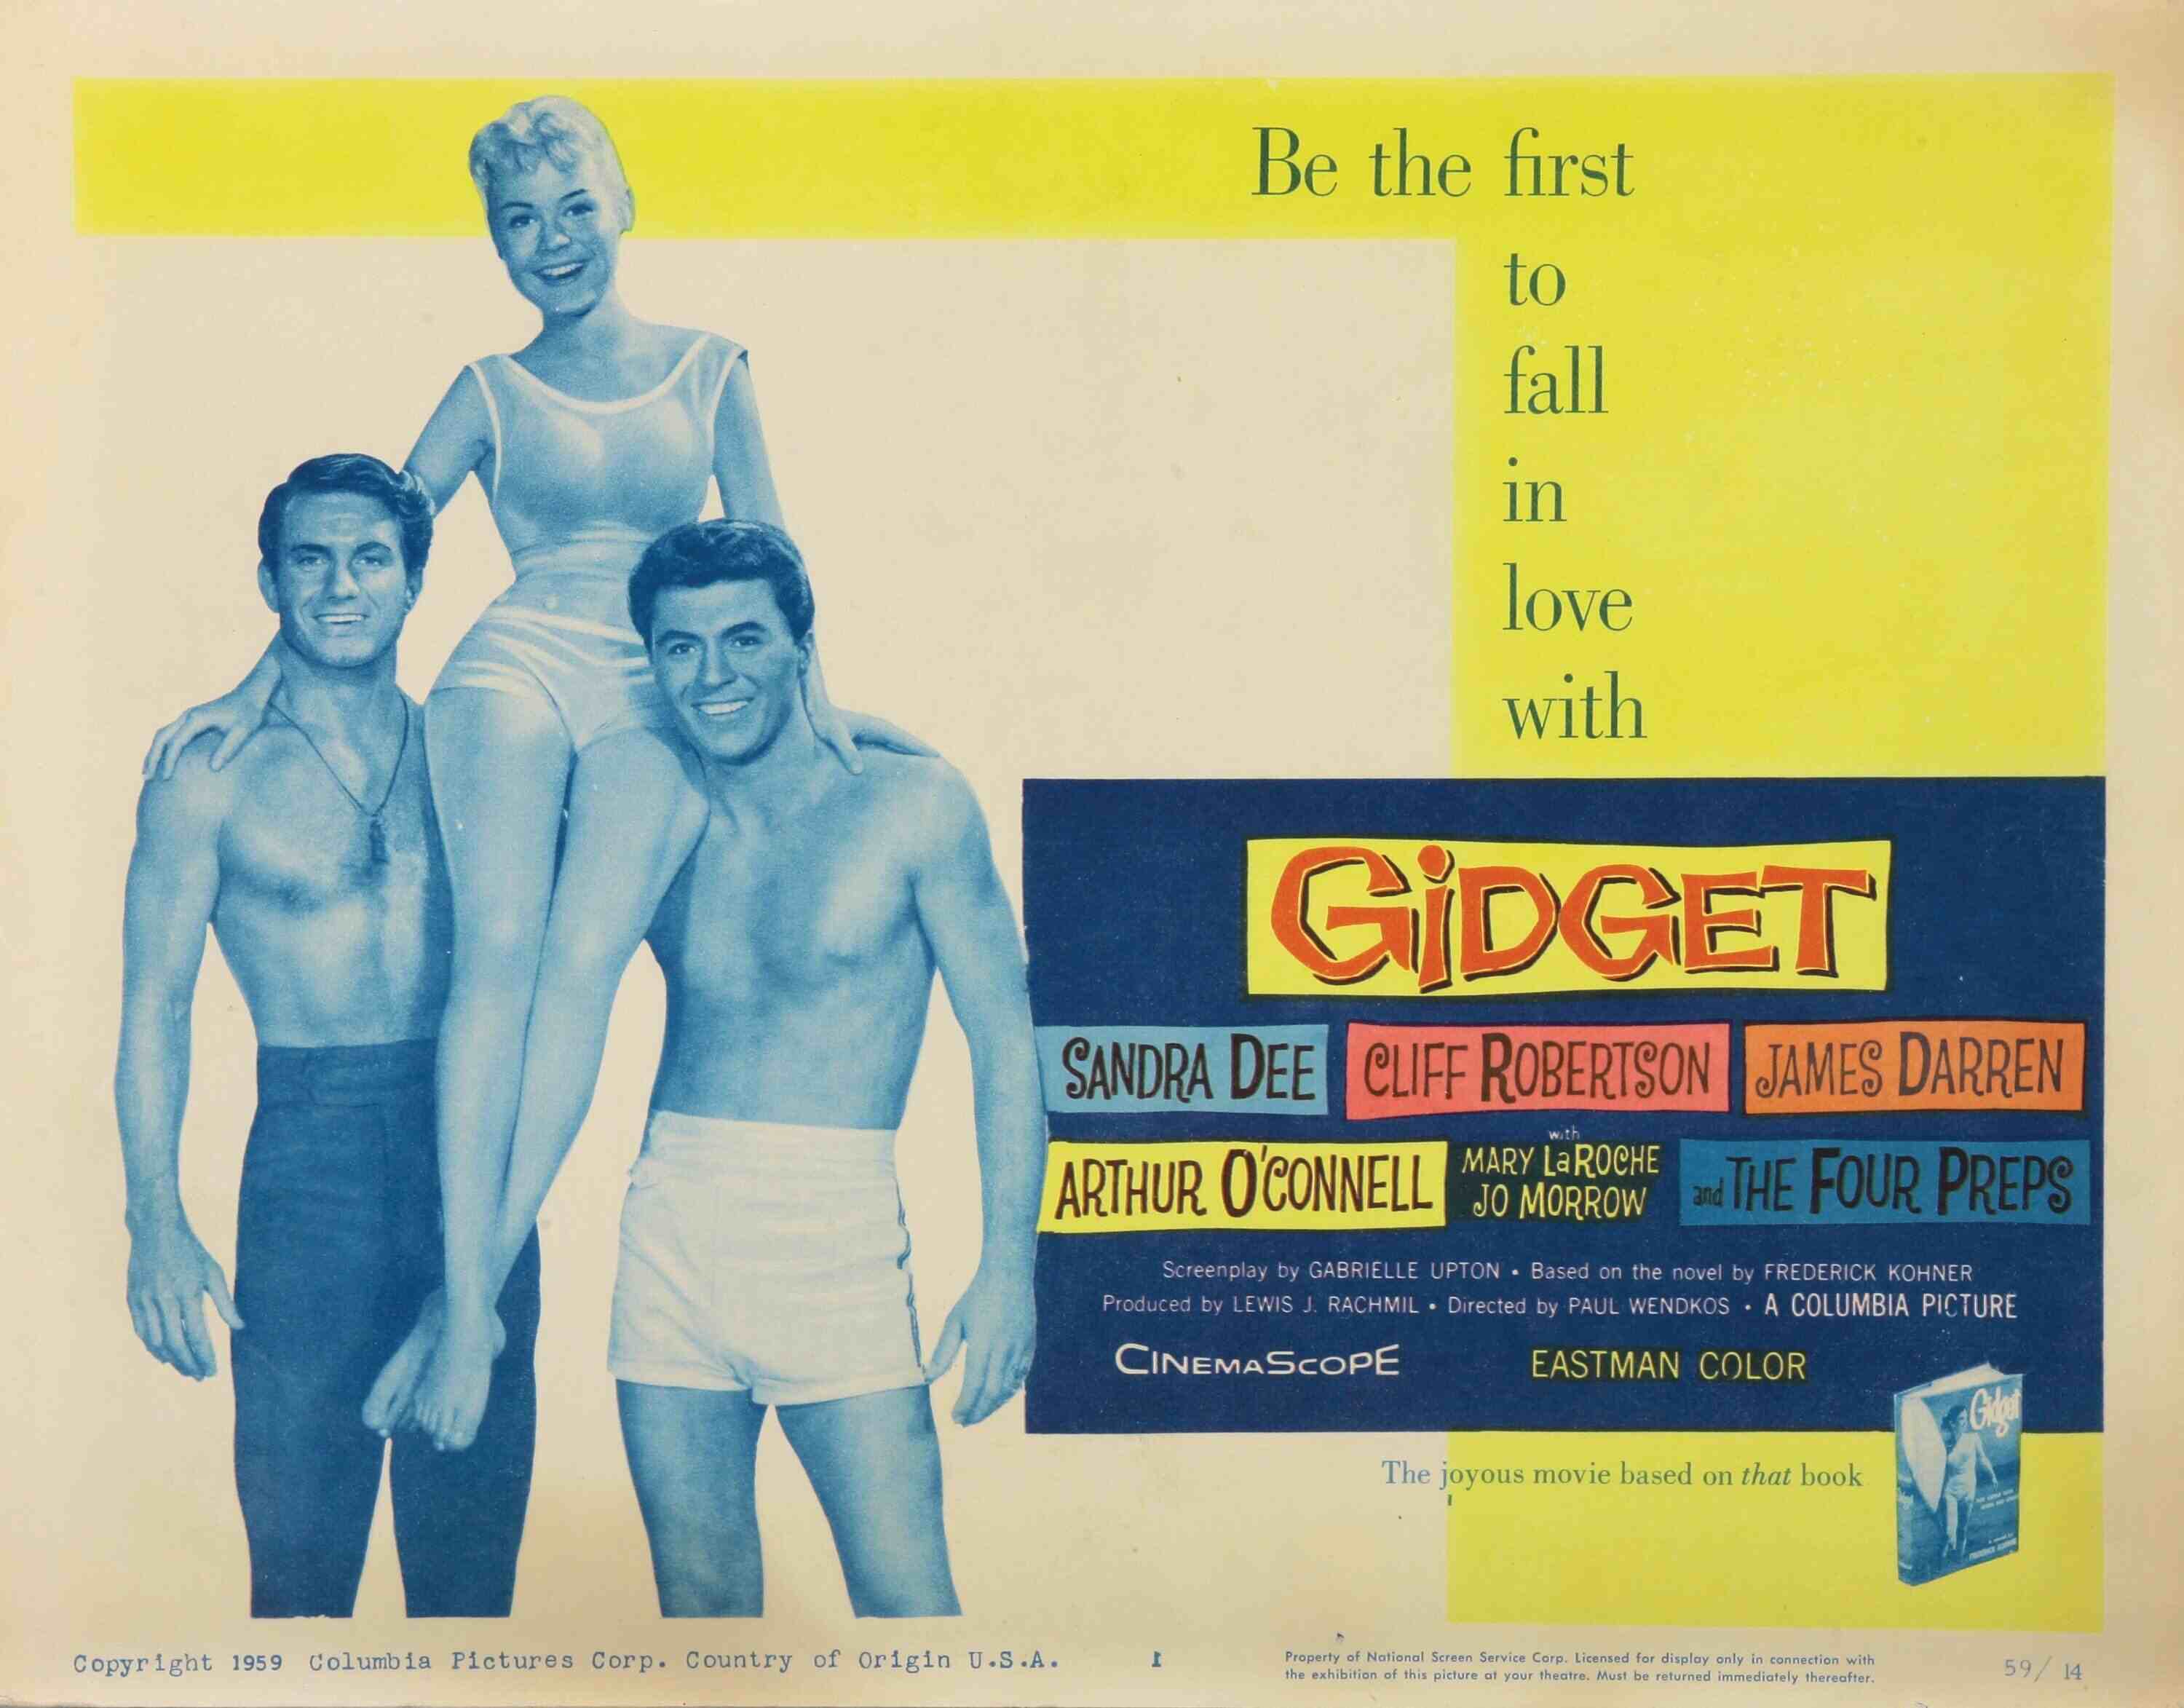 A lobbycard for 'Gidget' starring Cliff Robertson, Sandra Dee and James Darren. Sandra Dee was the first actor to take on the role of GIdget